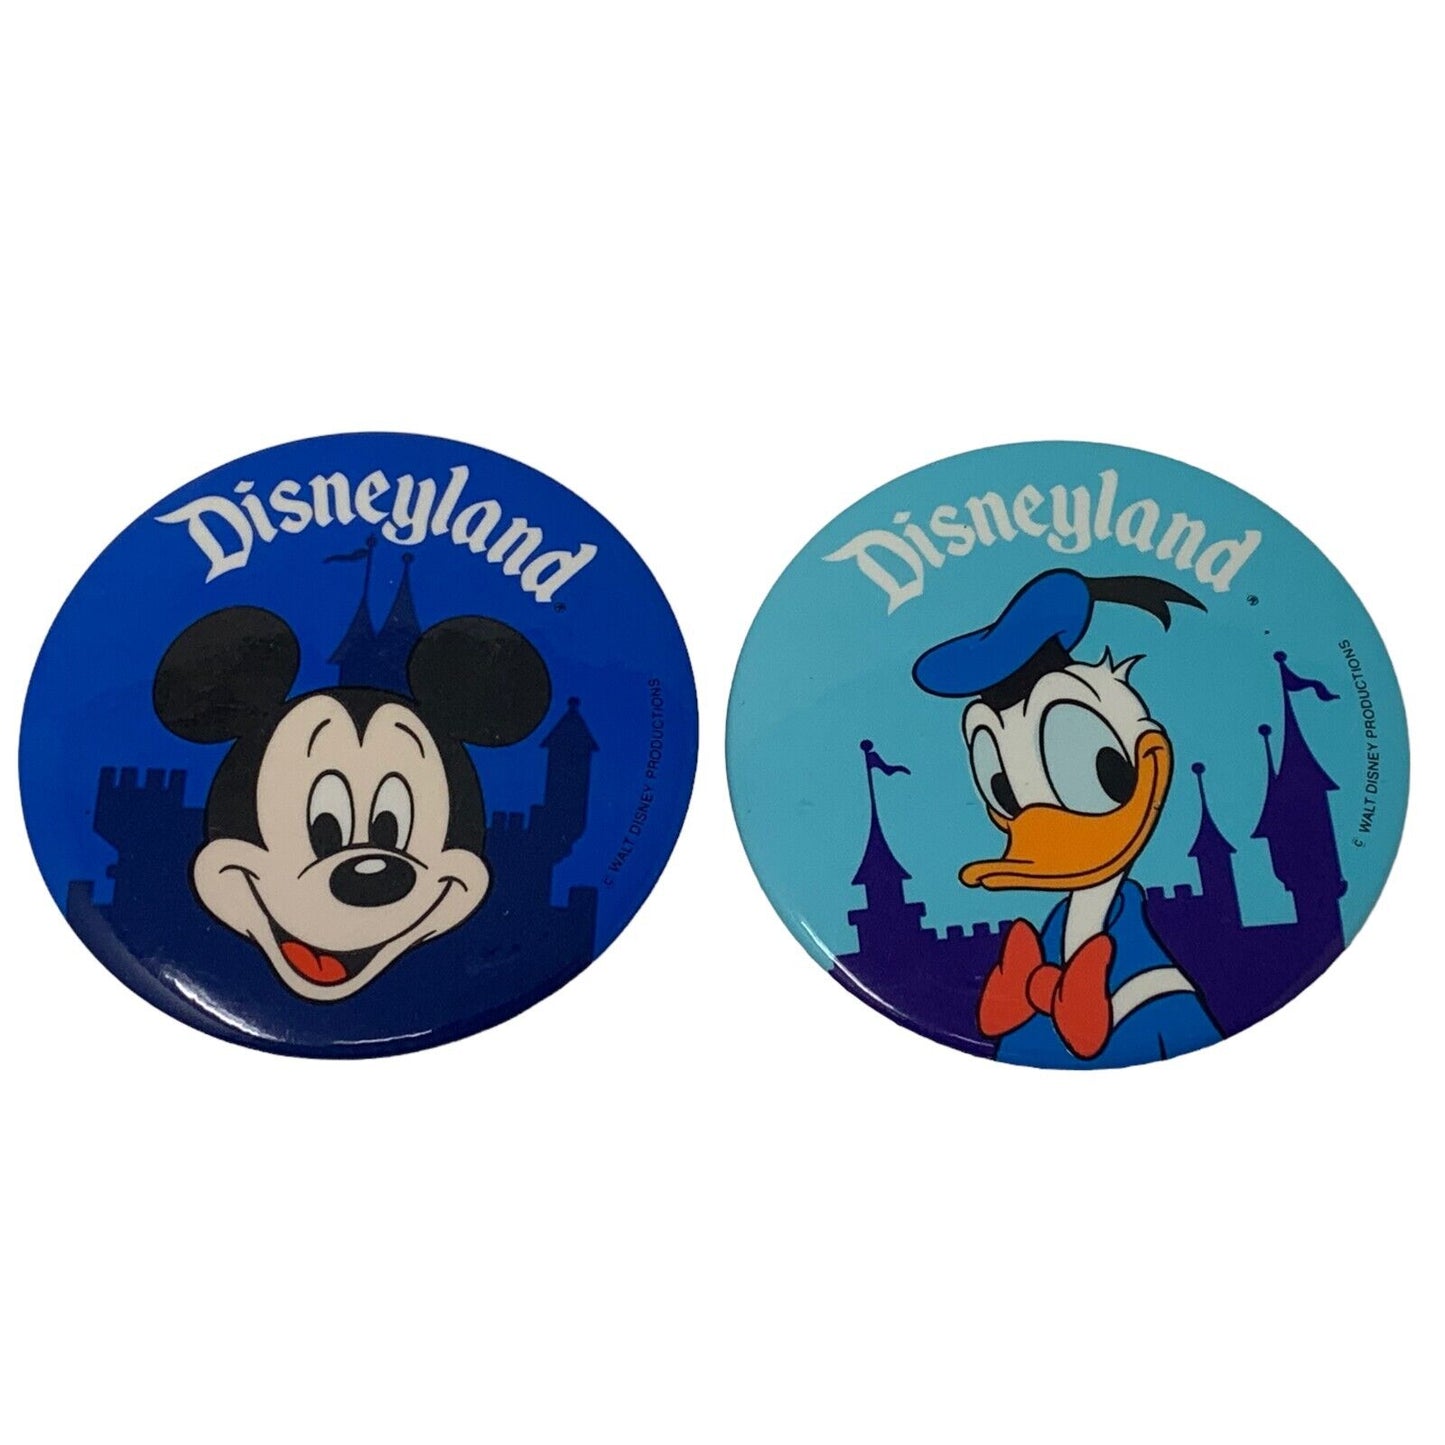 Lot Of 2 Disneyland Vintage 80s Pinback Buttons Mickey Mouse Donald Duck Disney